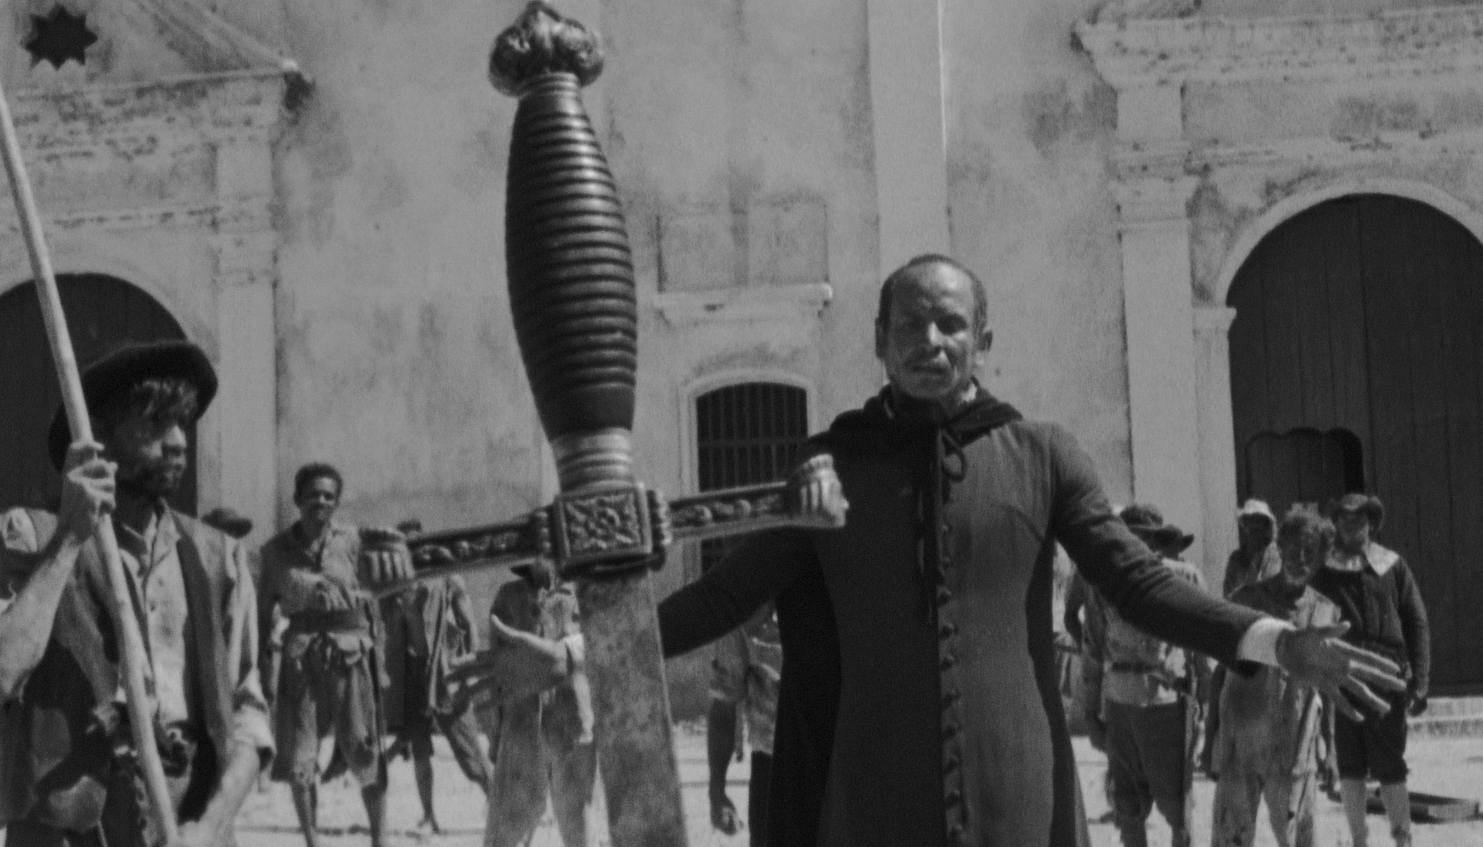 A man in religious garb stands with his hands out to his sides in front of a large stone building behind a giant sword stuck in the ground.